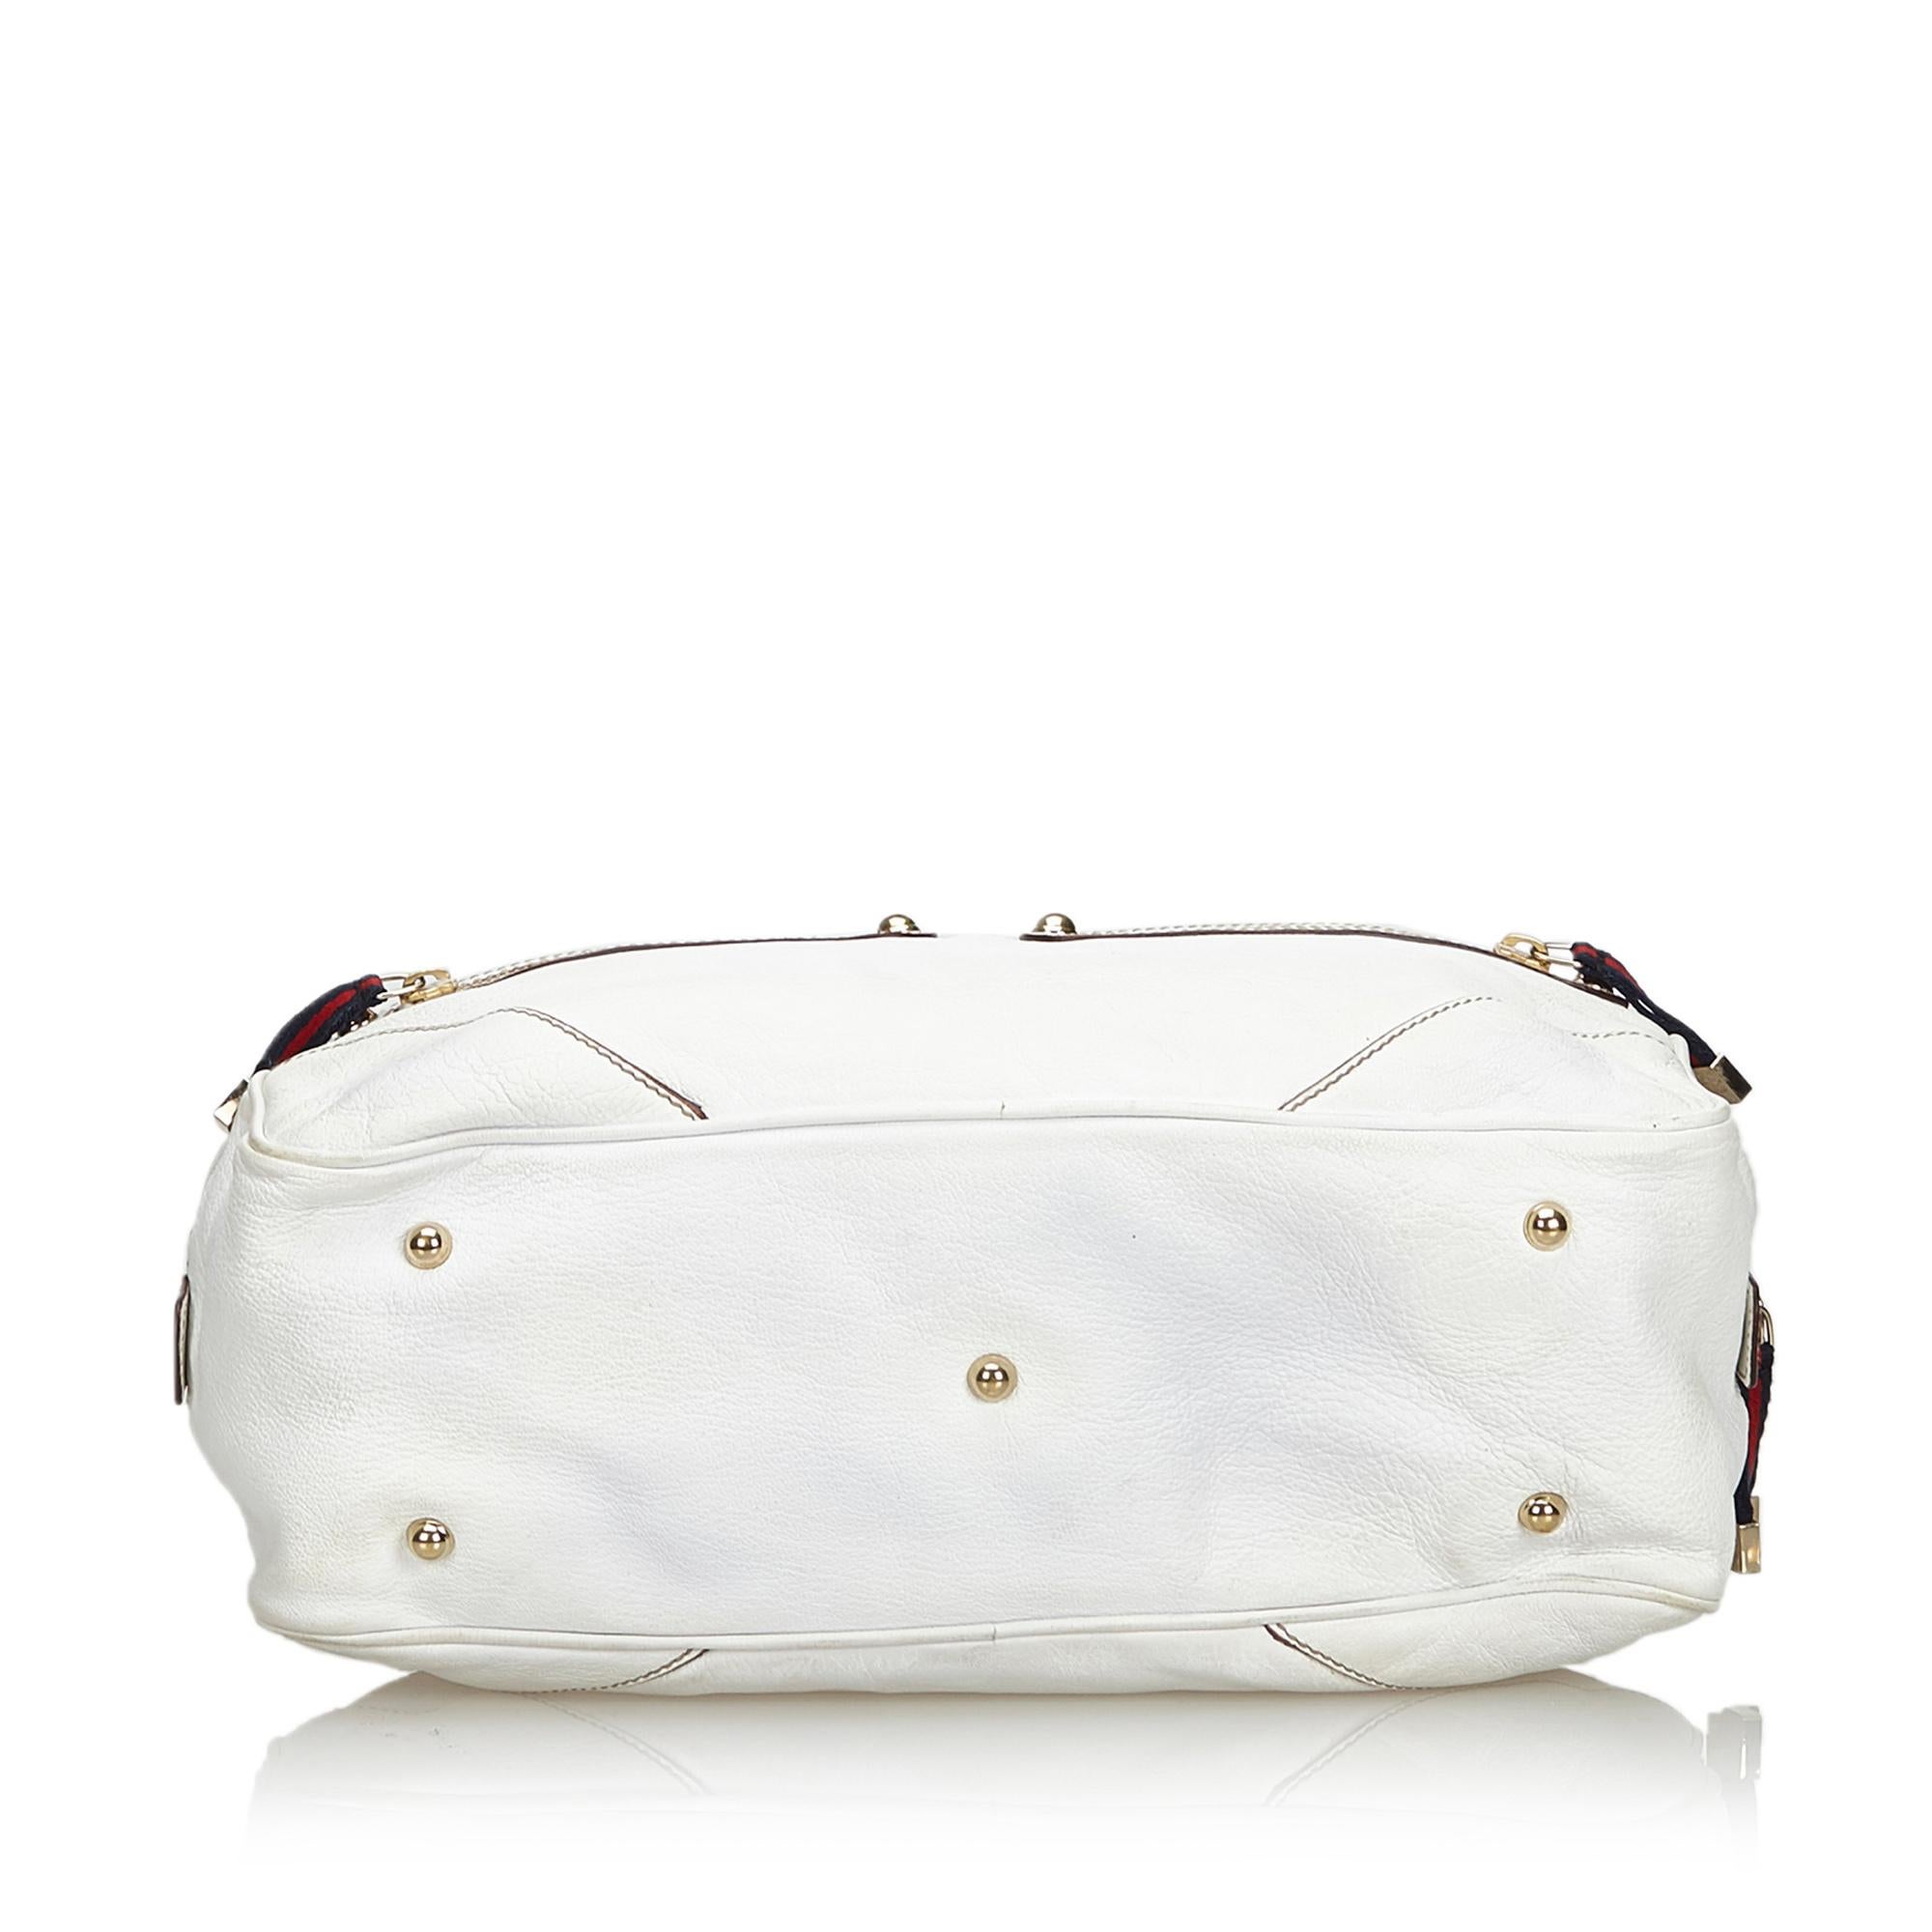 Vintage Authentic Gucci White Leather Princy Shoulder Bag Italy MEDIUM  In Good Condition For Sale In Orlando, FL